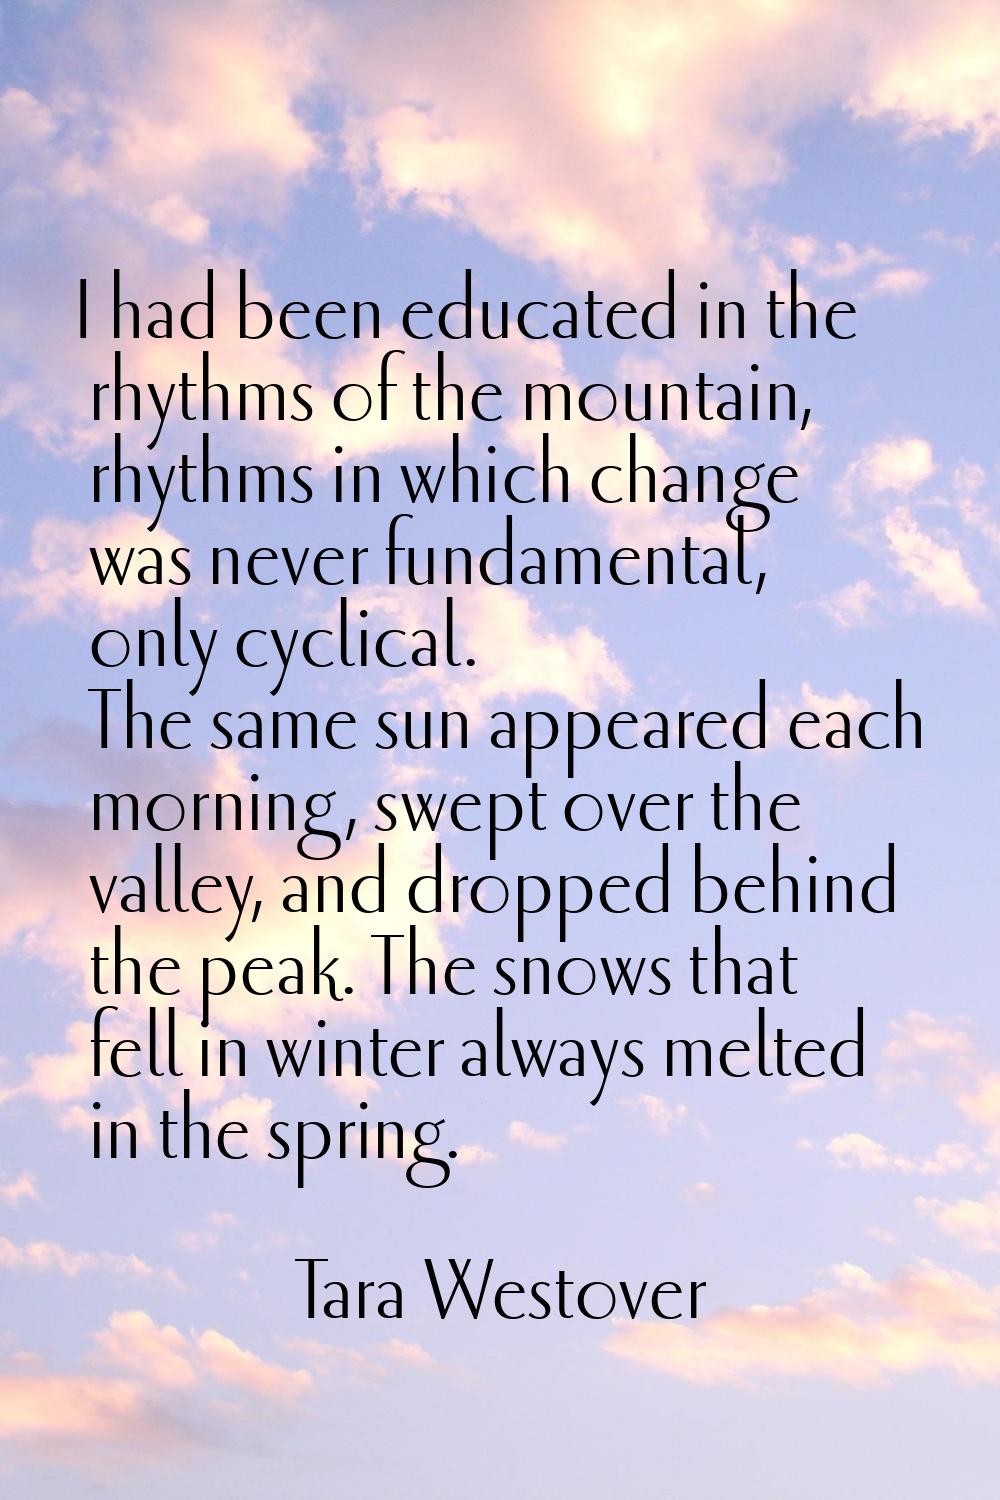 I had been educated in the rhythms of the mountain, rhythms in which change was never fundamental, 